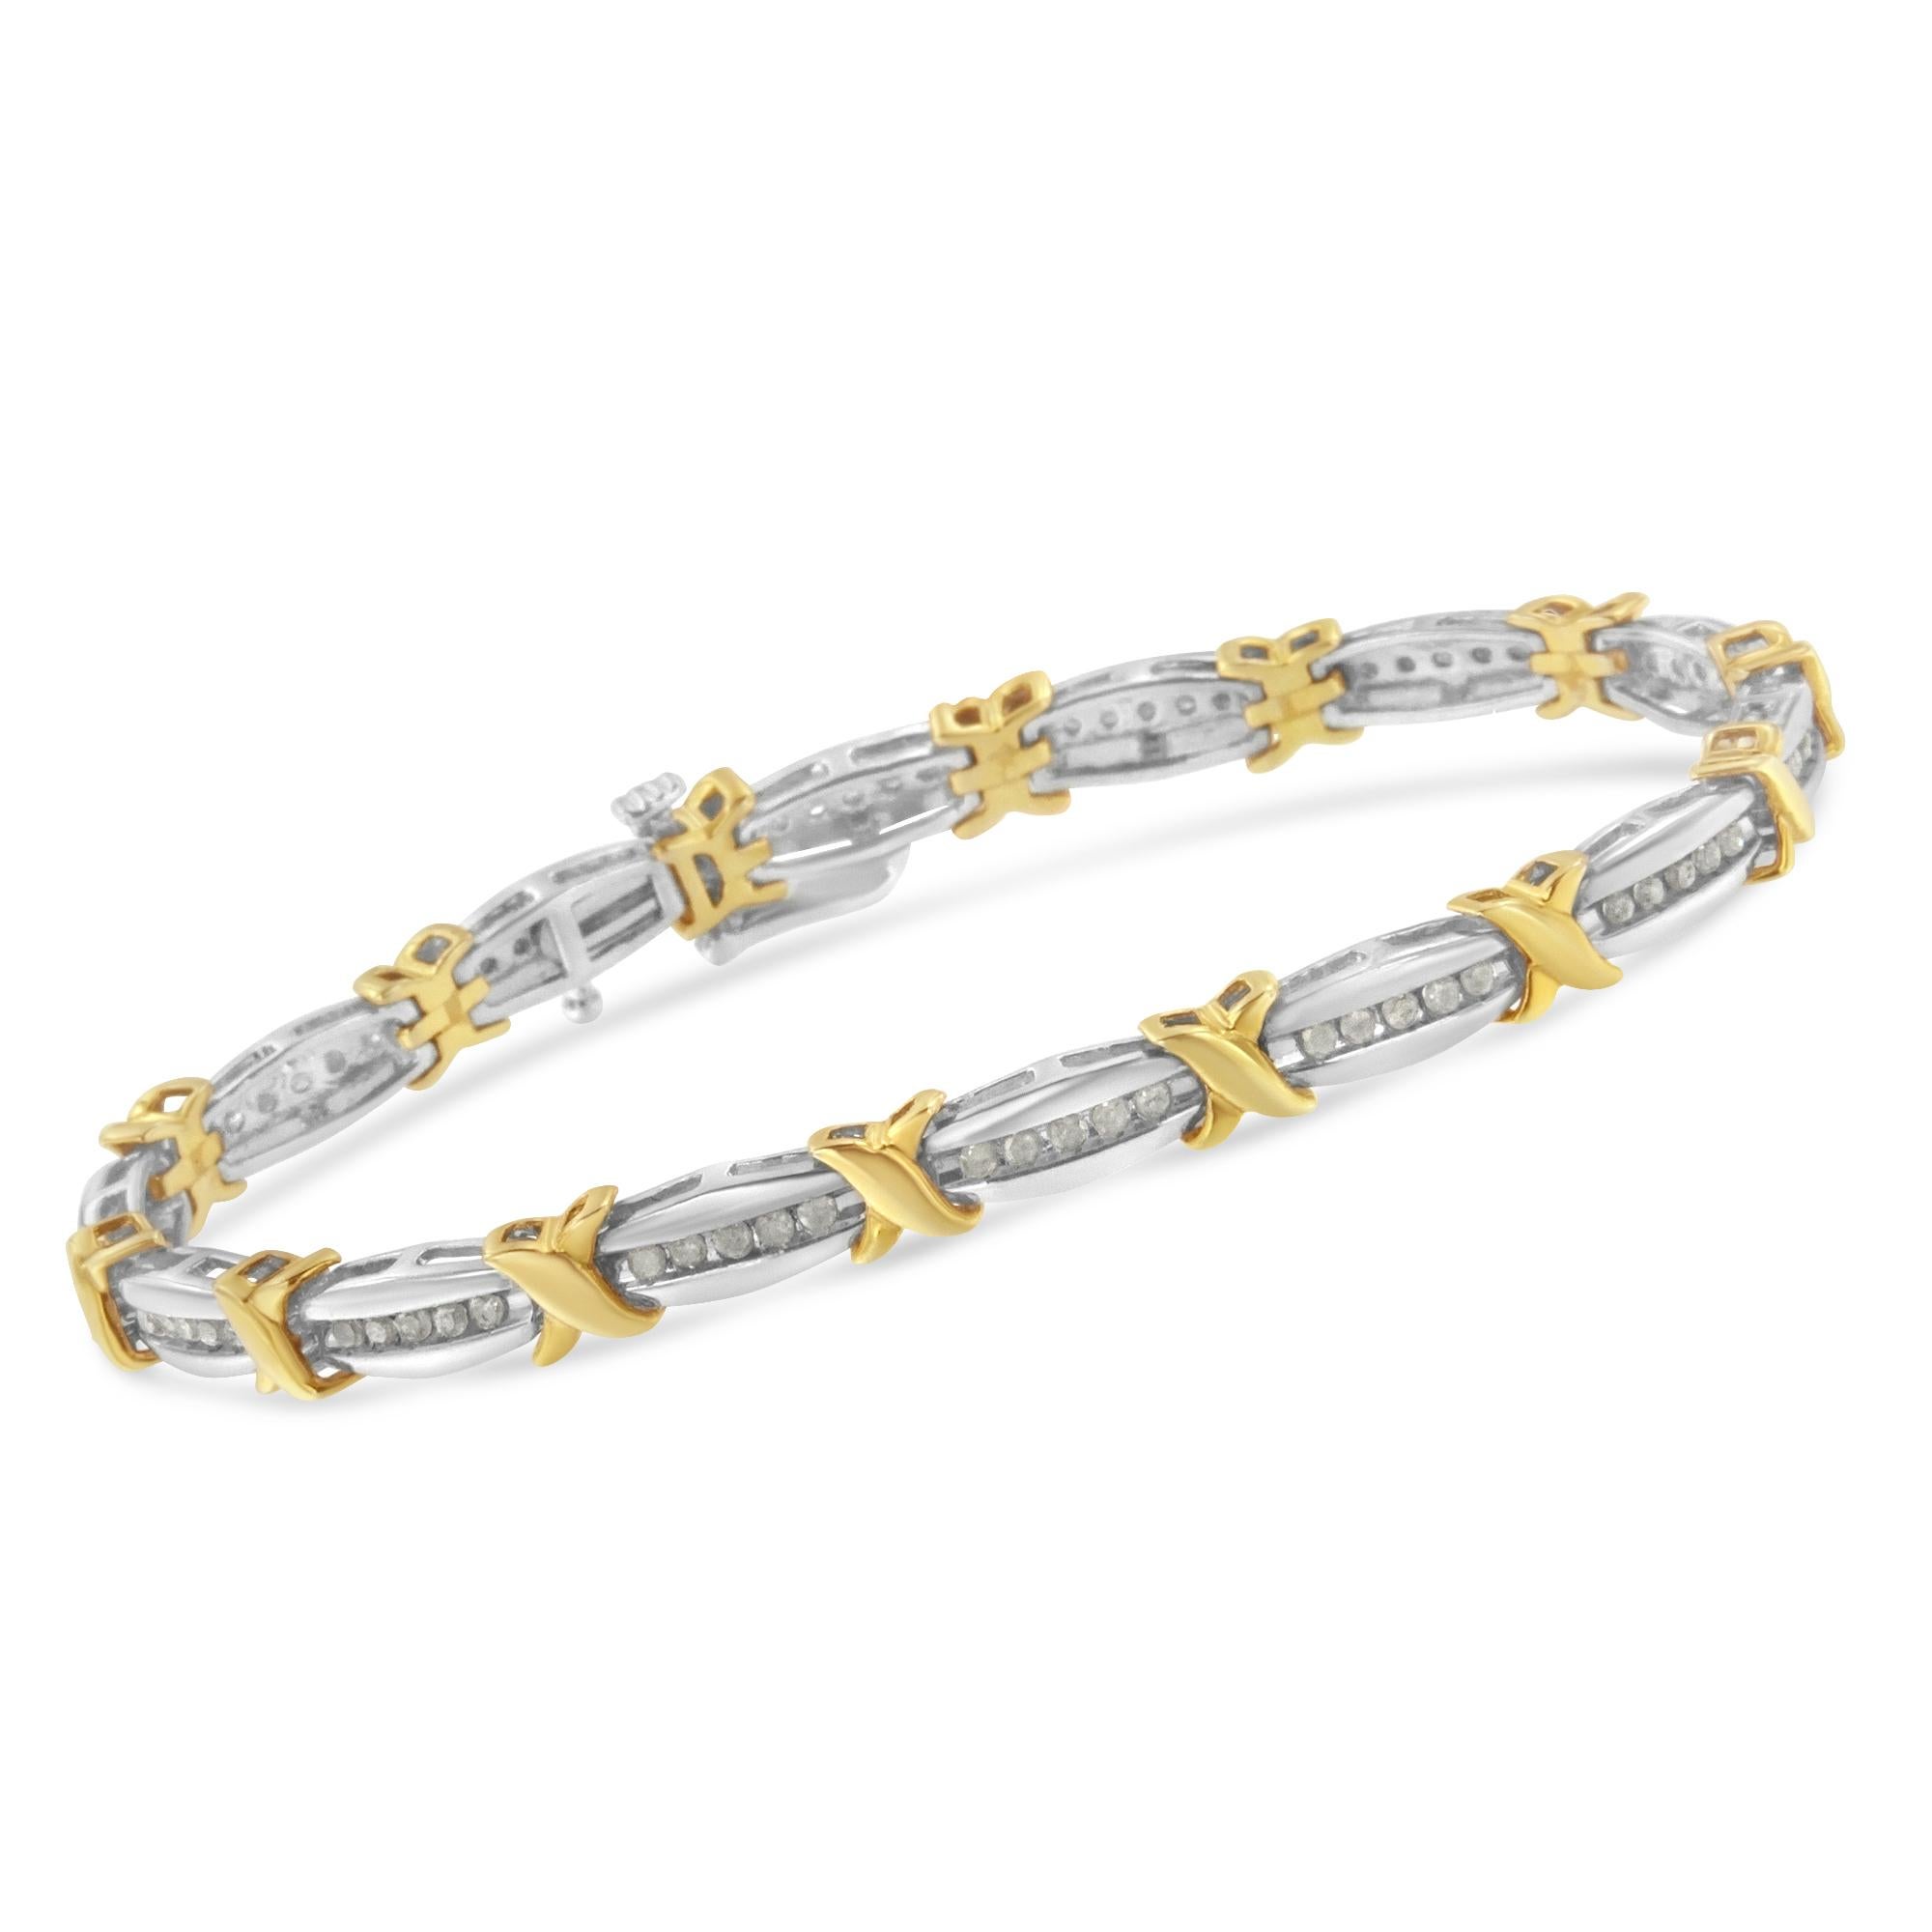 Contemporary Two-Tone Gold Plated Sterling Silver 1.0 Carat Diamond X-Link Bracelet